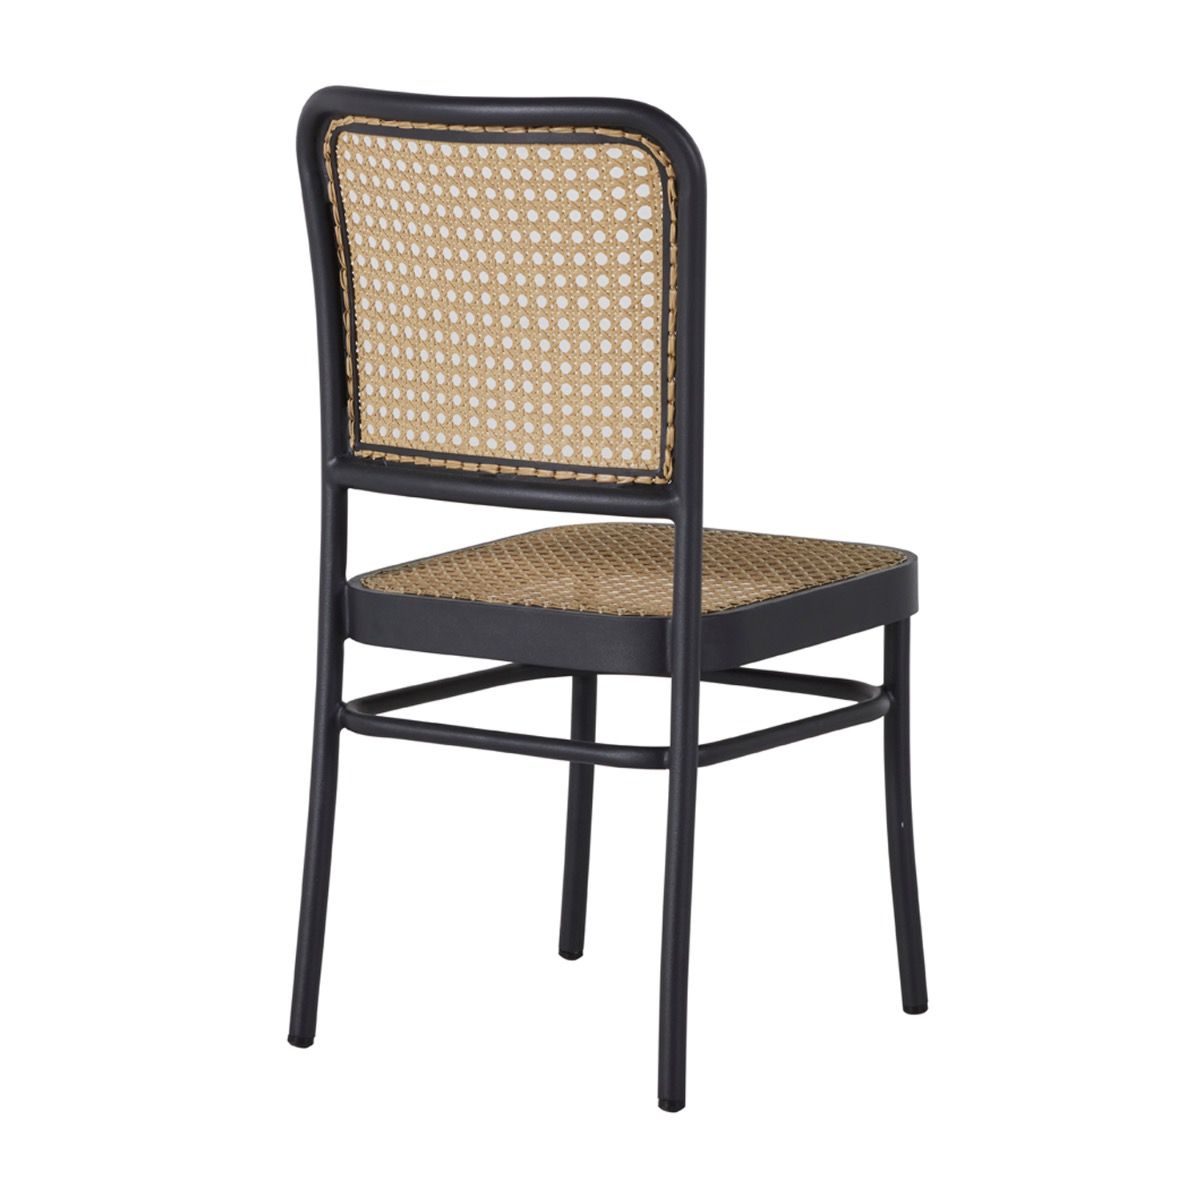 bordeaux side chair – midnight/natural resin product image